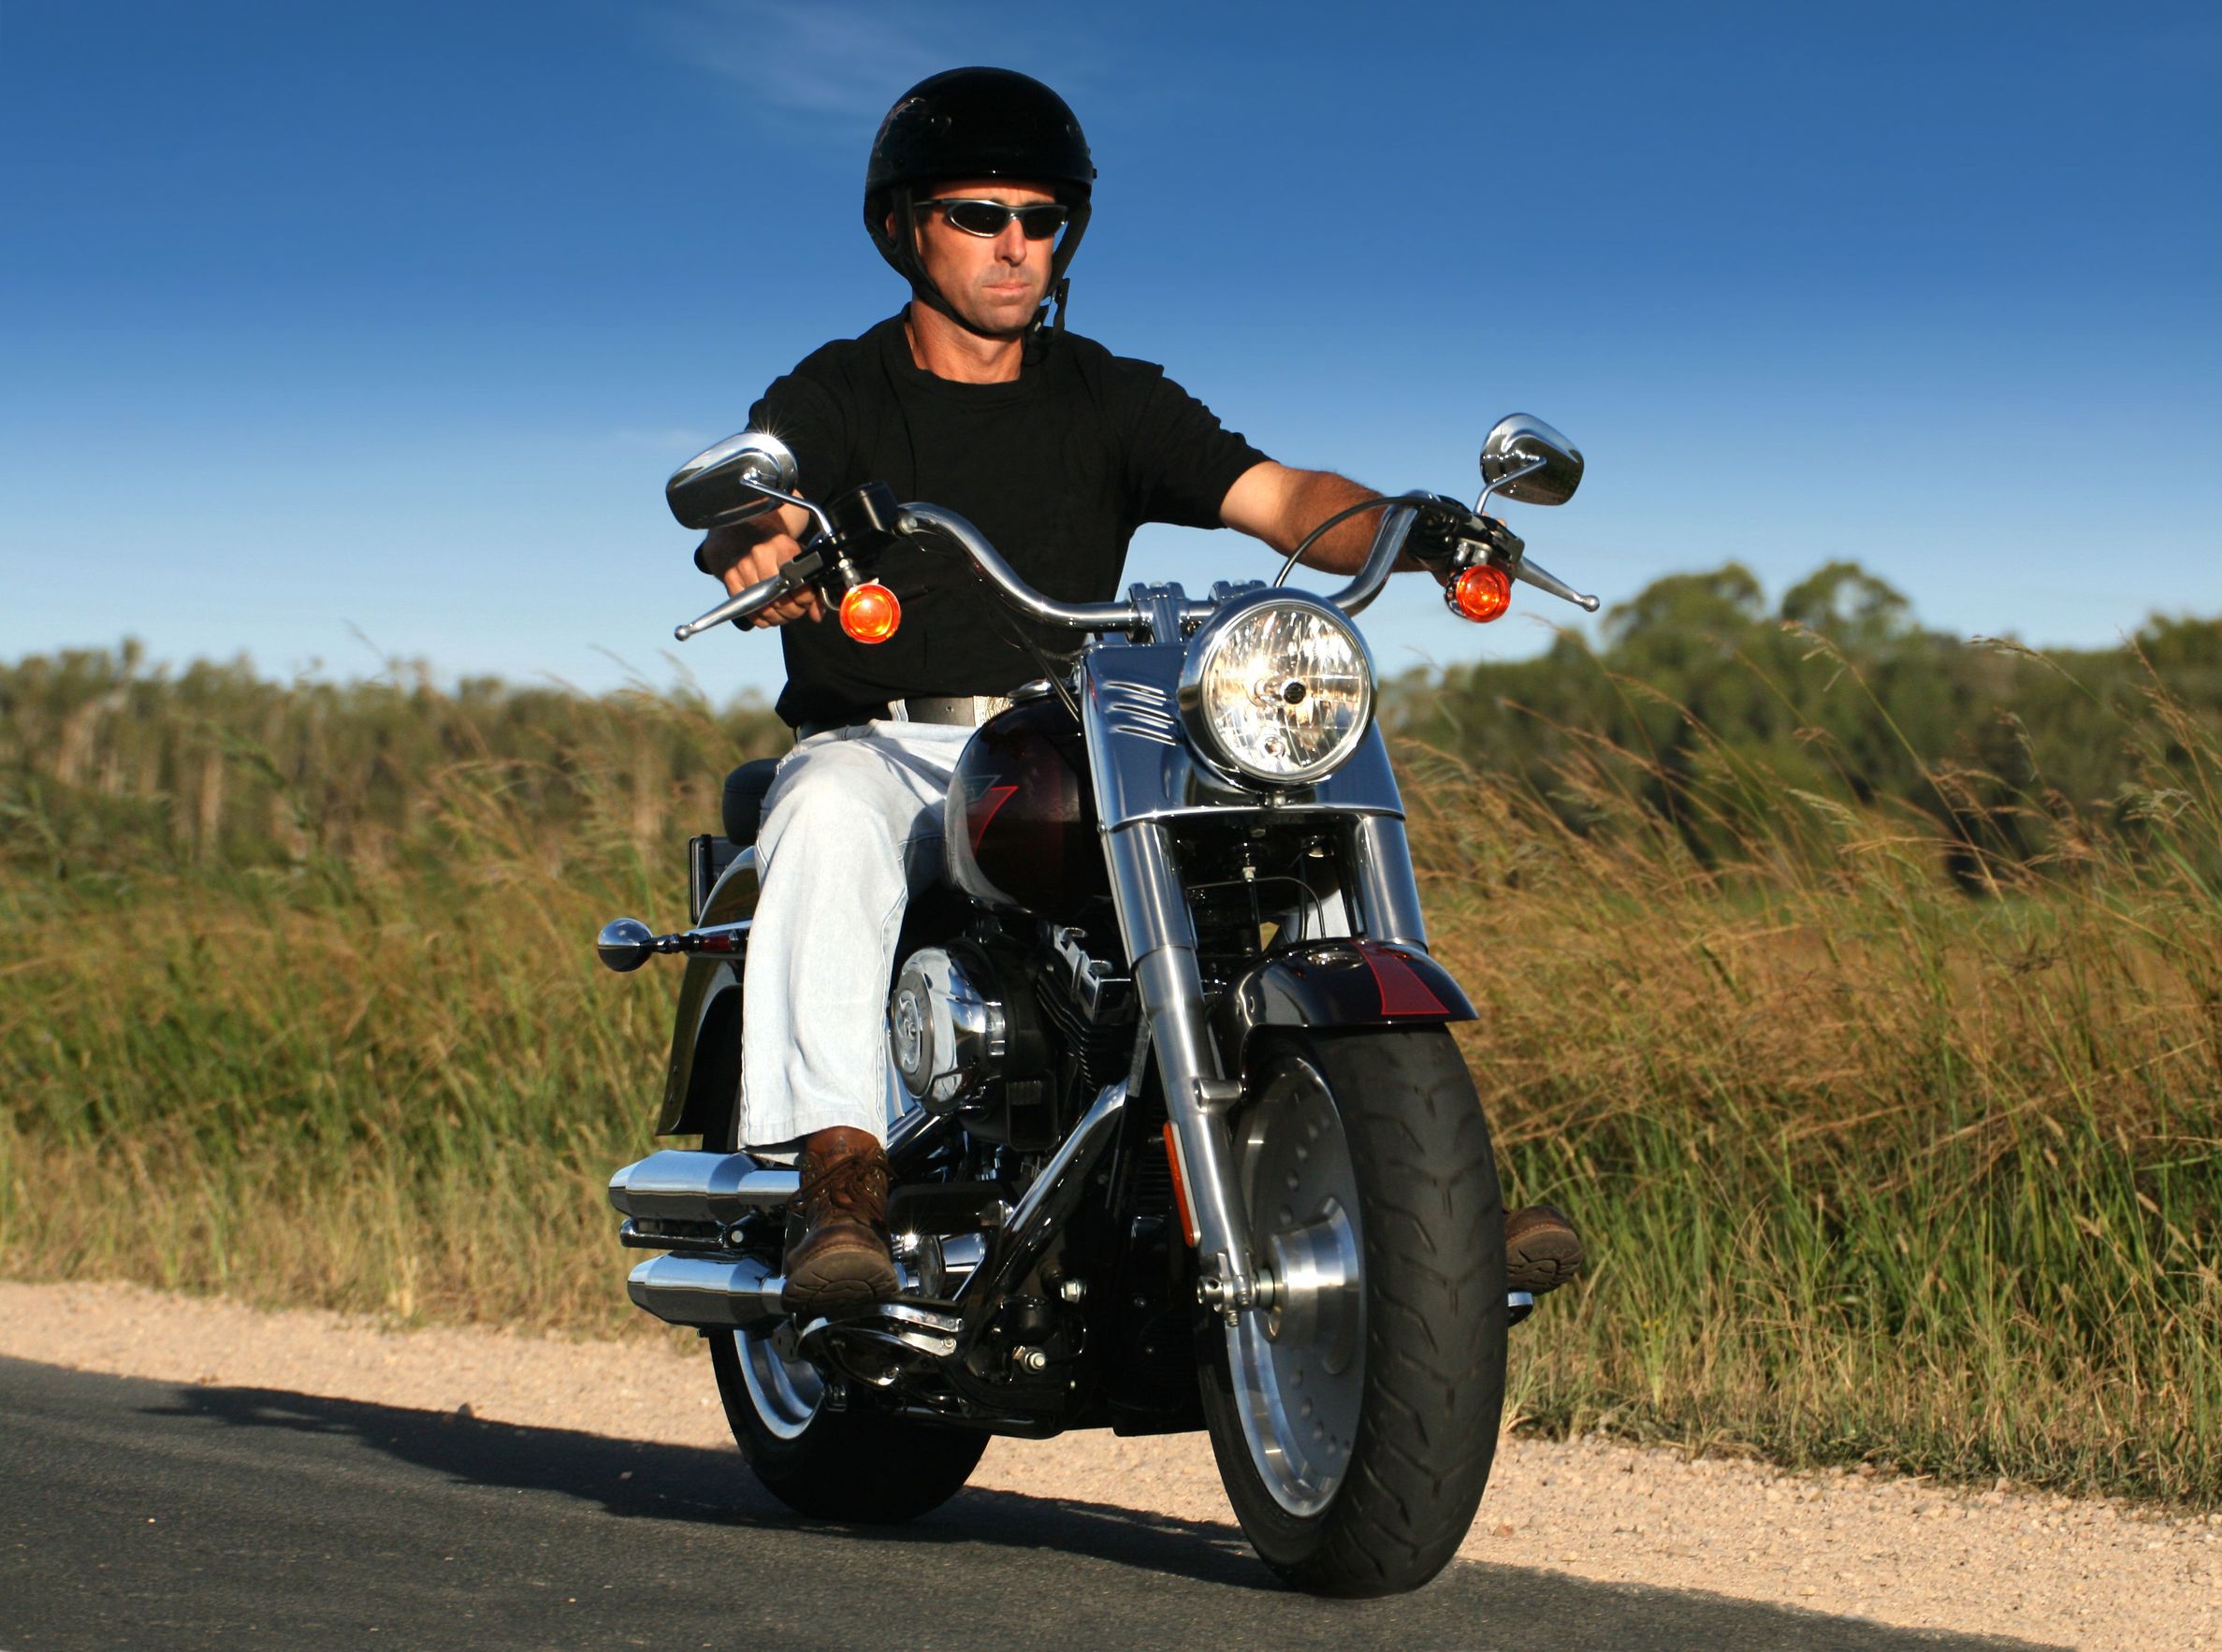 Make the Most of Your West Palm Beach Vacation on a Motorcycle